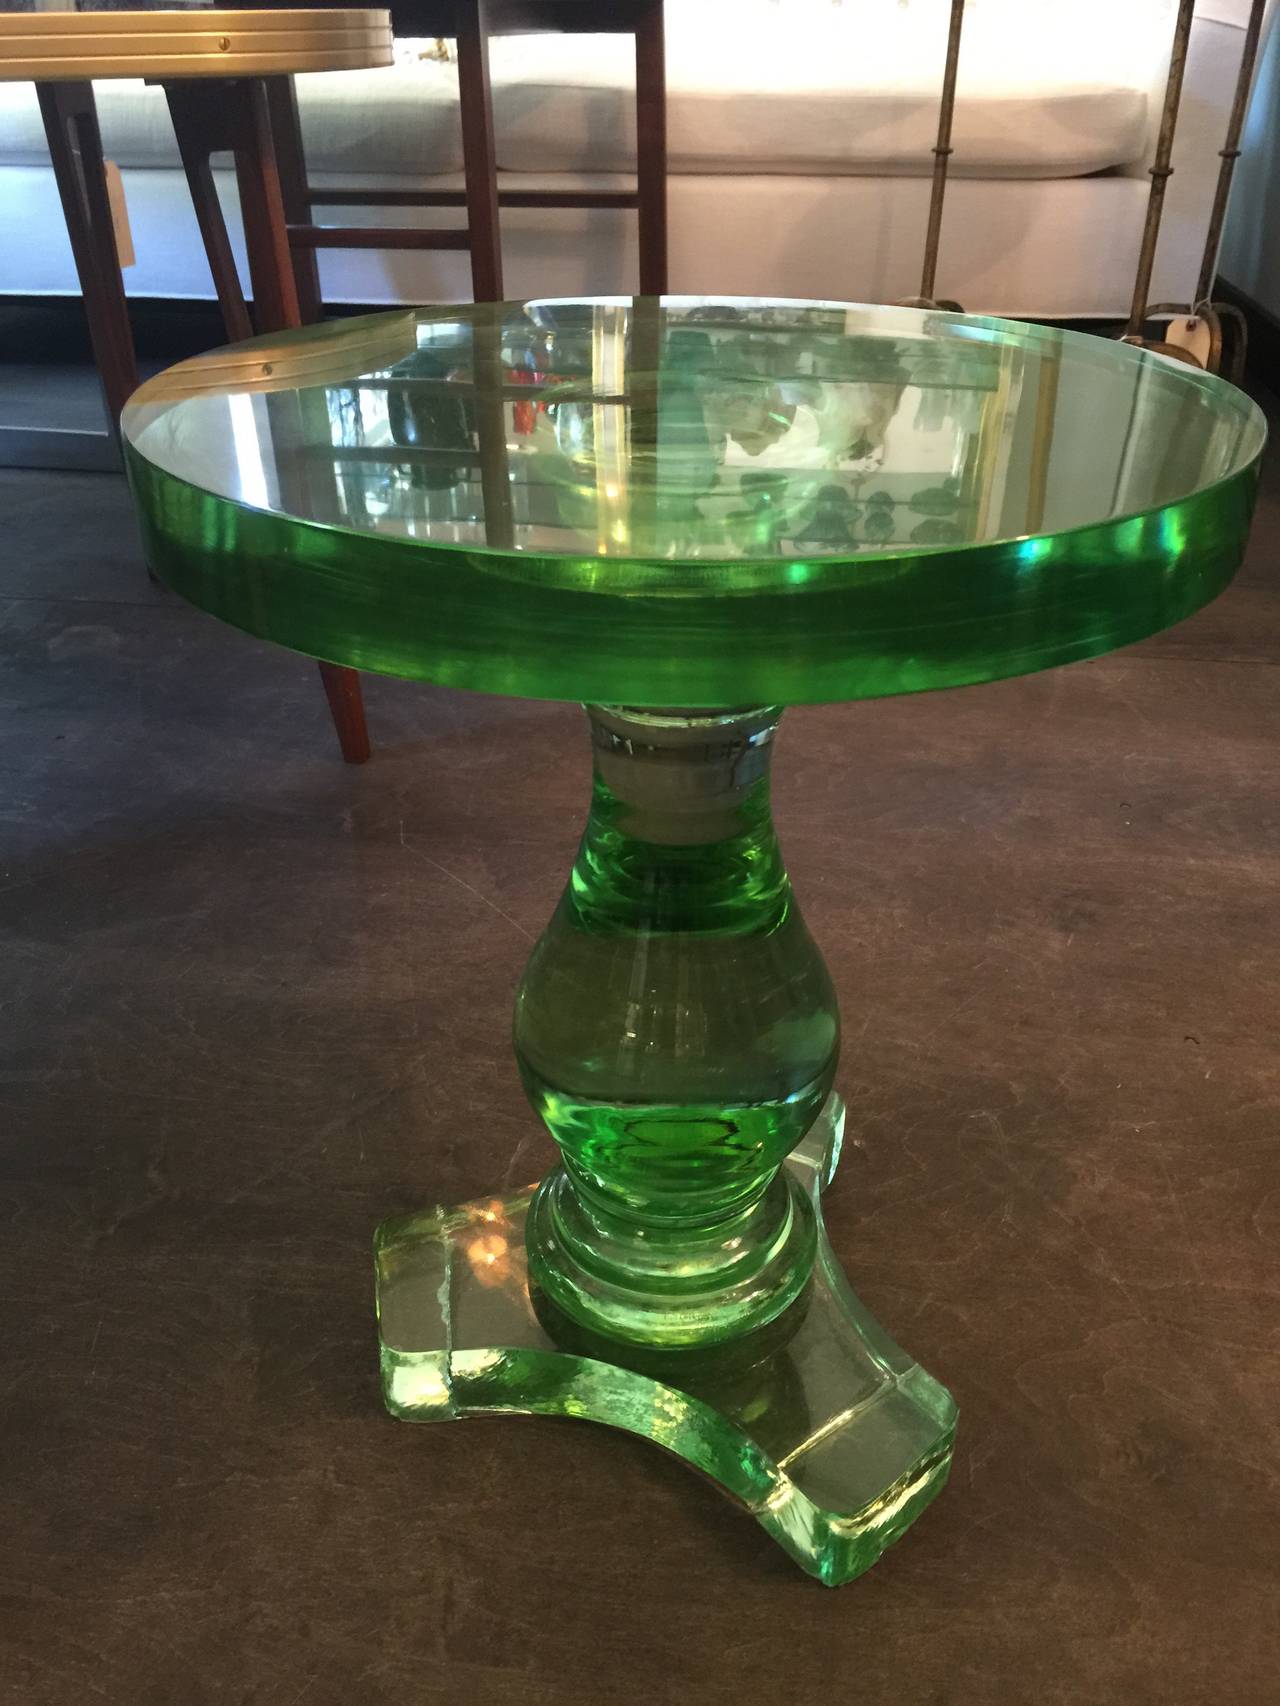 Absolutely stunning and made of thick, solid Murano glass. Petite  heavy side table - minor chips to base, hard to notice.